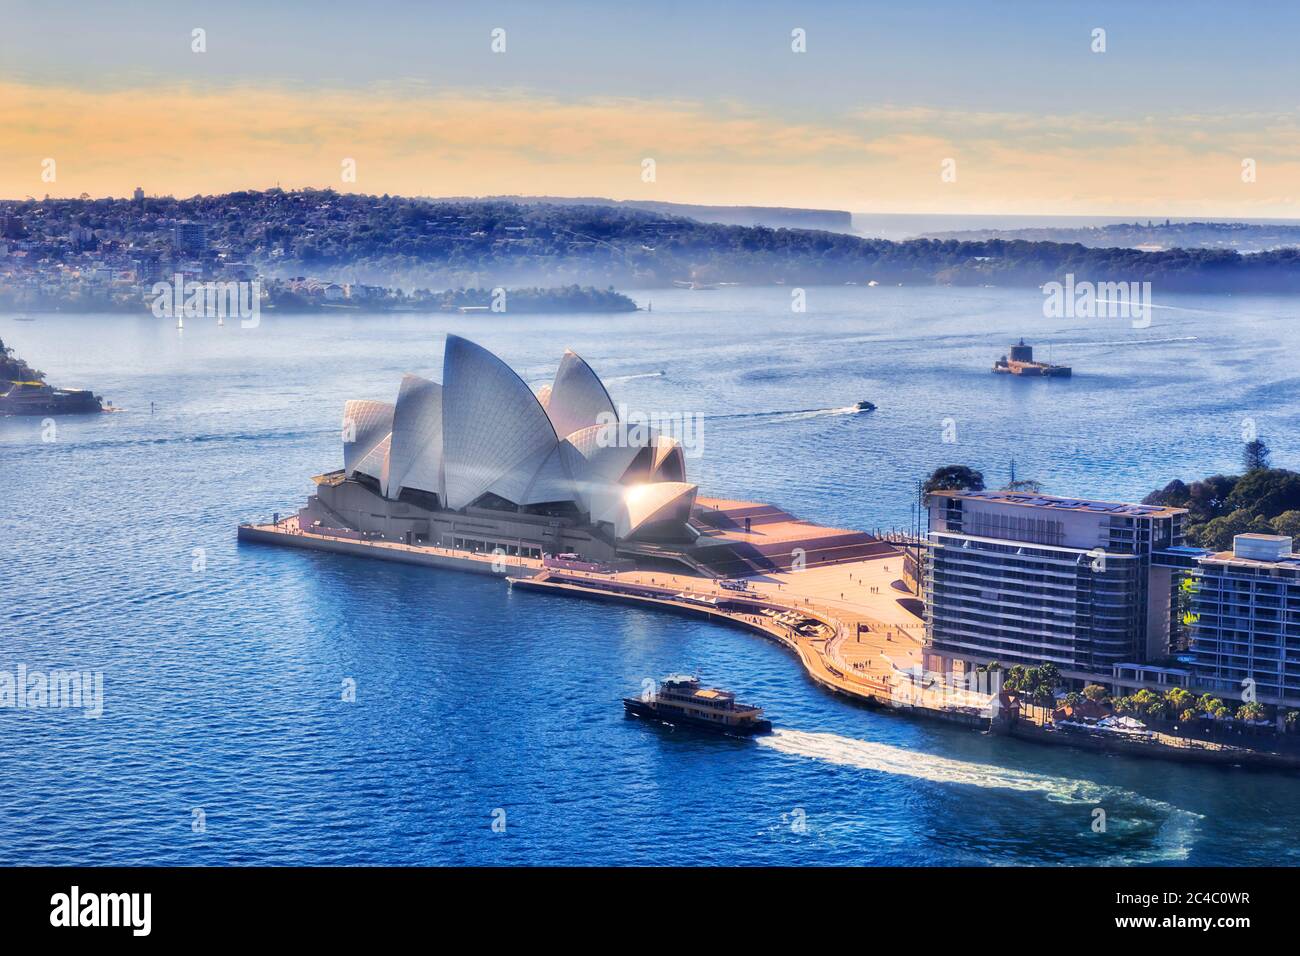 Sydney, Autralia - 20 June 2020: Sydney Opera house on Sydney harbour with passenger ferries from altitude of Circular Quay towers. Stock Photo